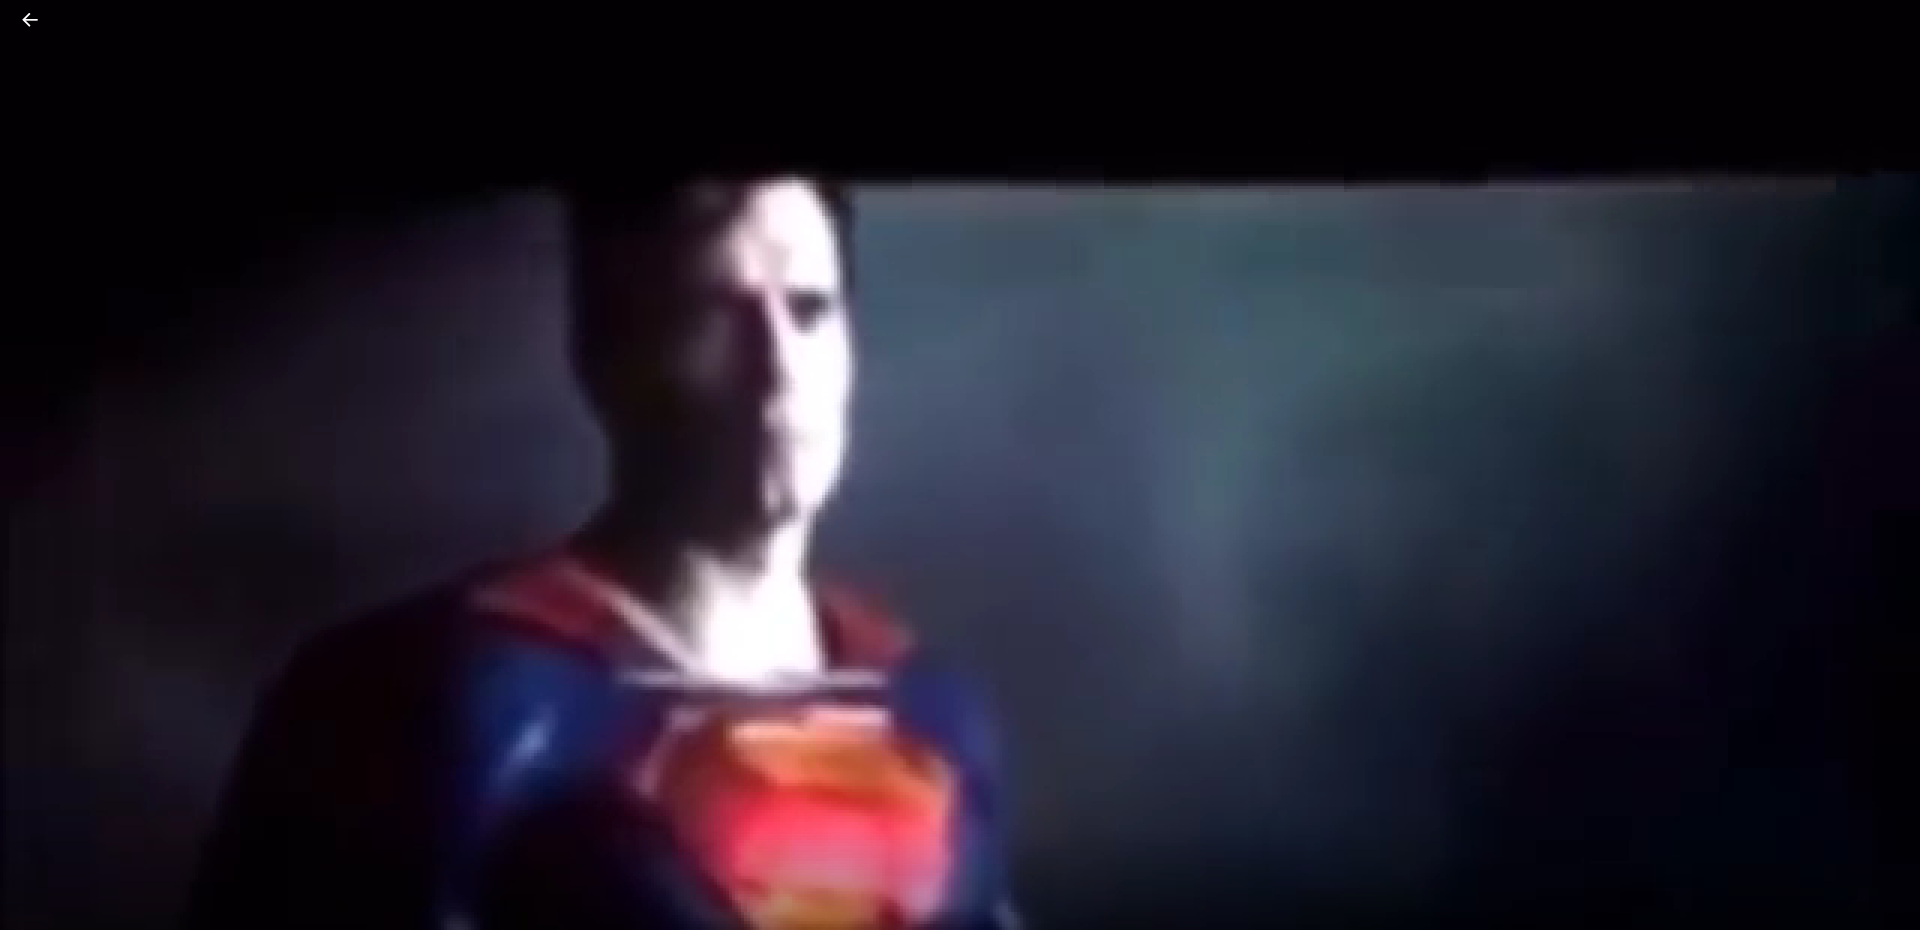 Black Adam Will Have a Henry Cavill Superman Cameo, Says Leaker -  GameRevolution